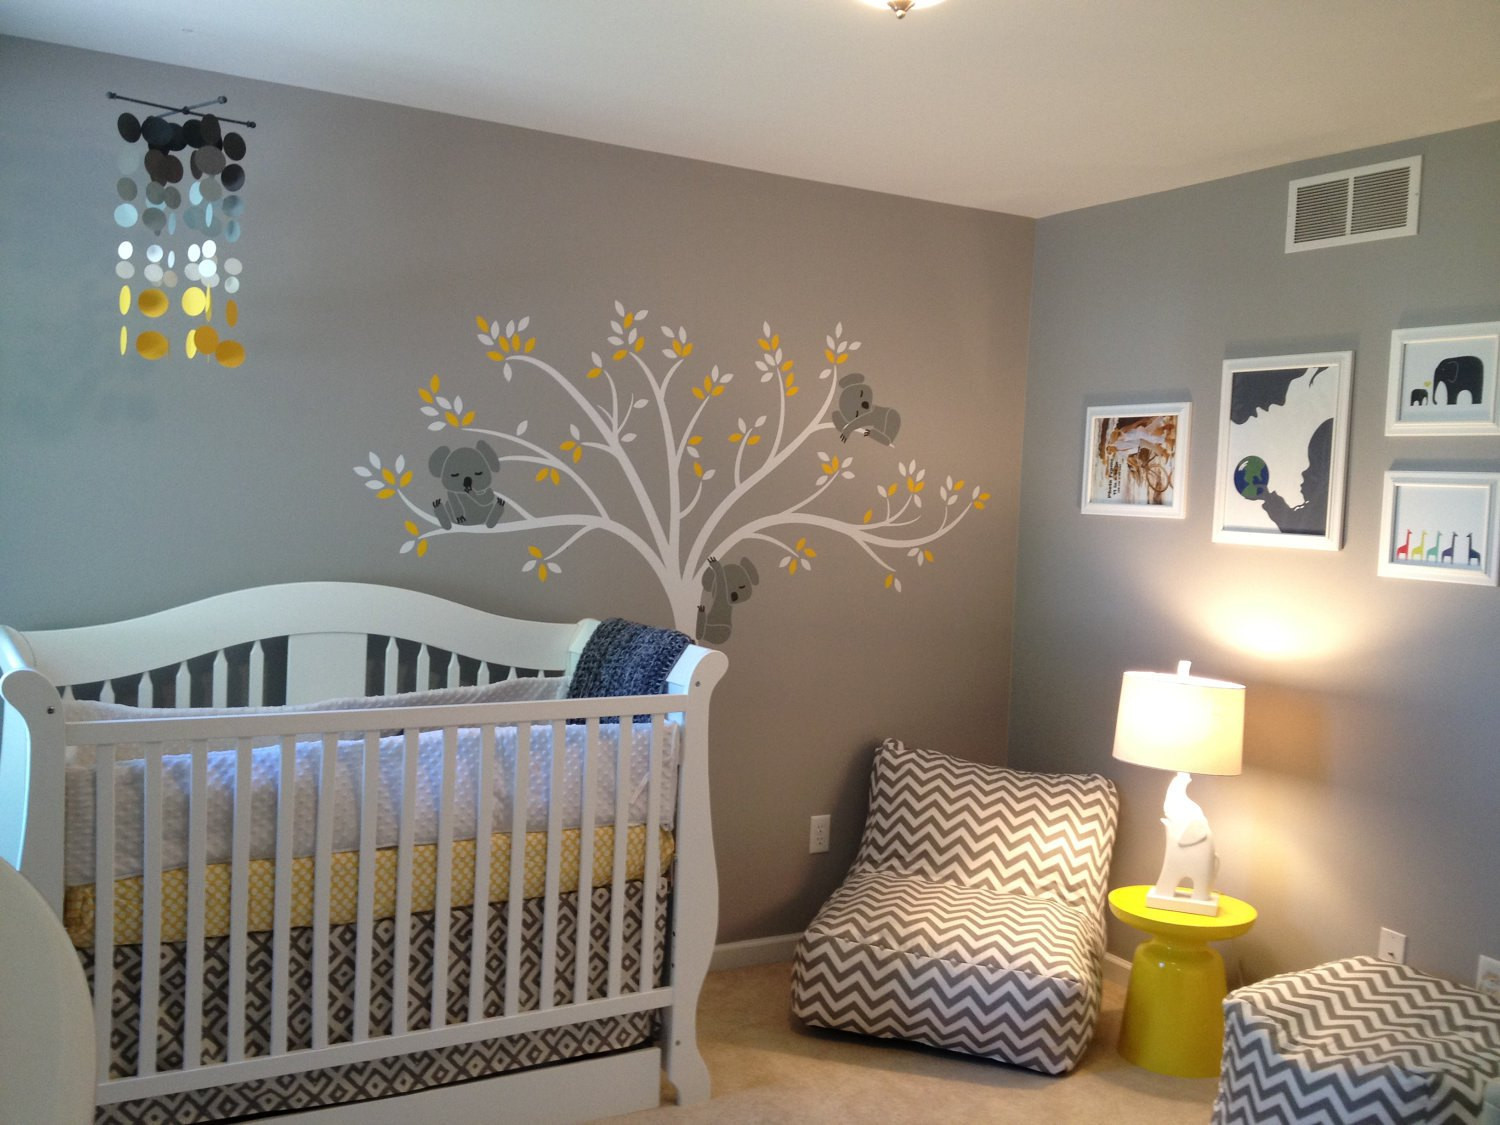 Baby Room Wall Decorating Ideas
 What Is the Best Nursery Wall Decor for Both Boys and